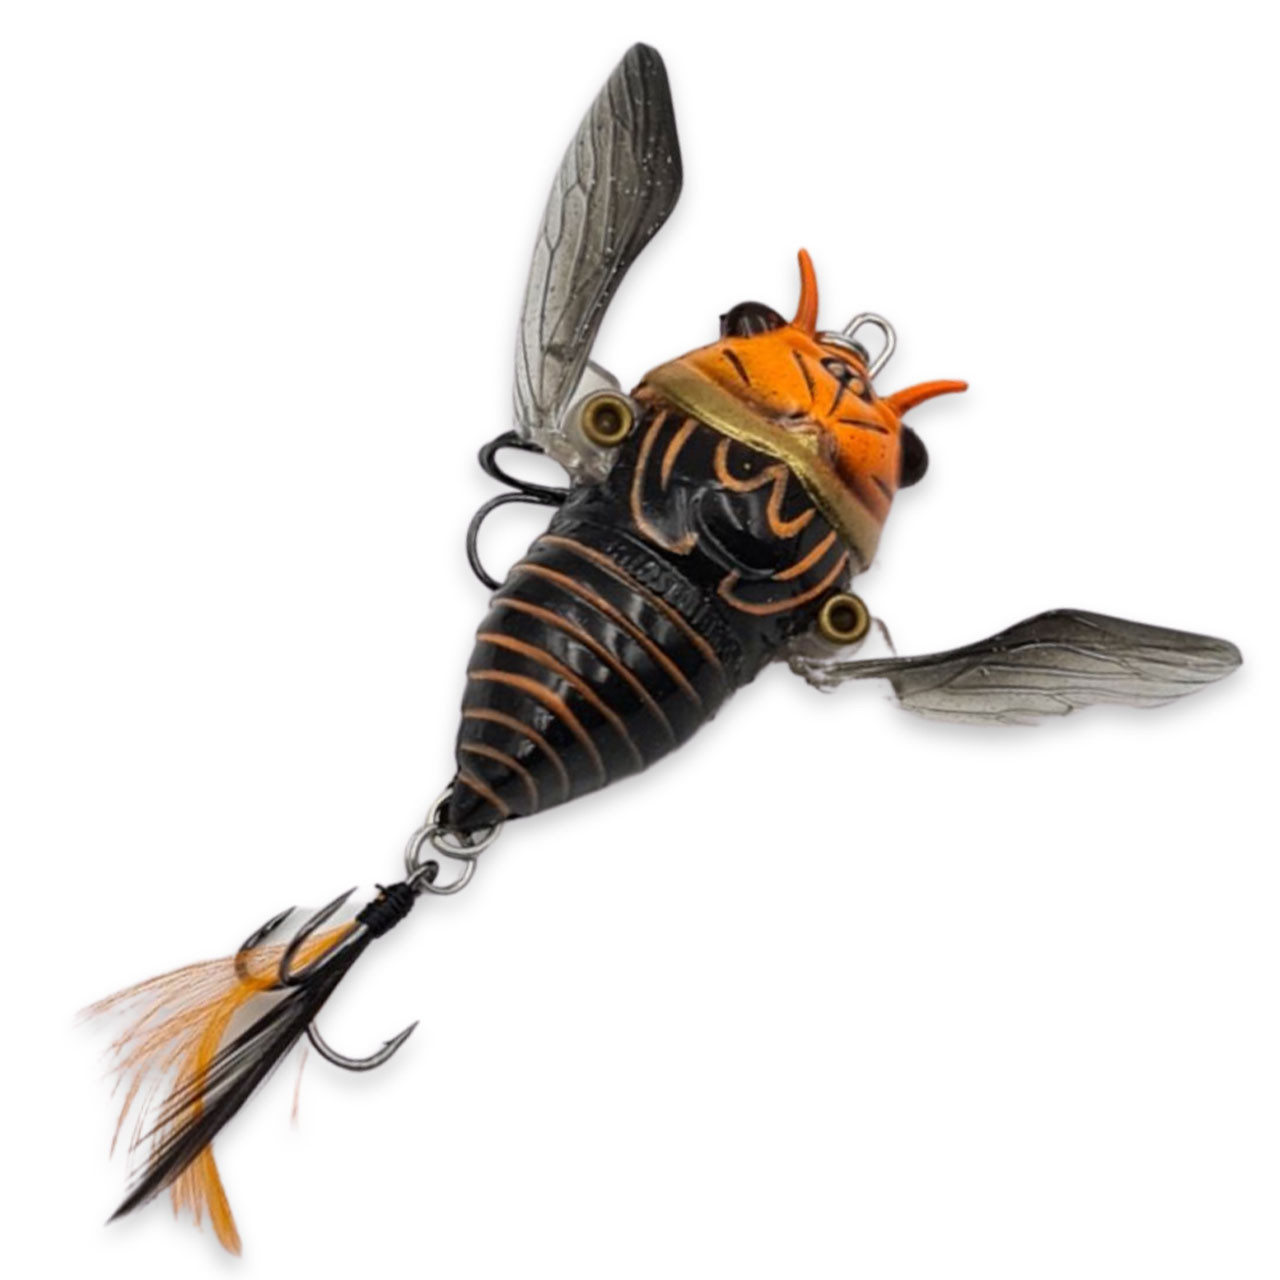 Chasebaits USA - The all new Ripple Cicada has landed